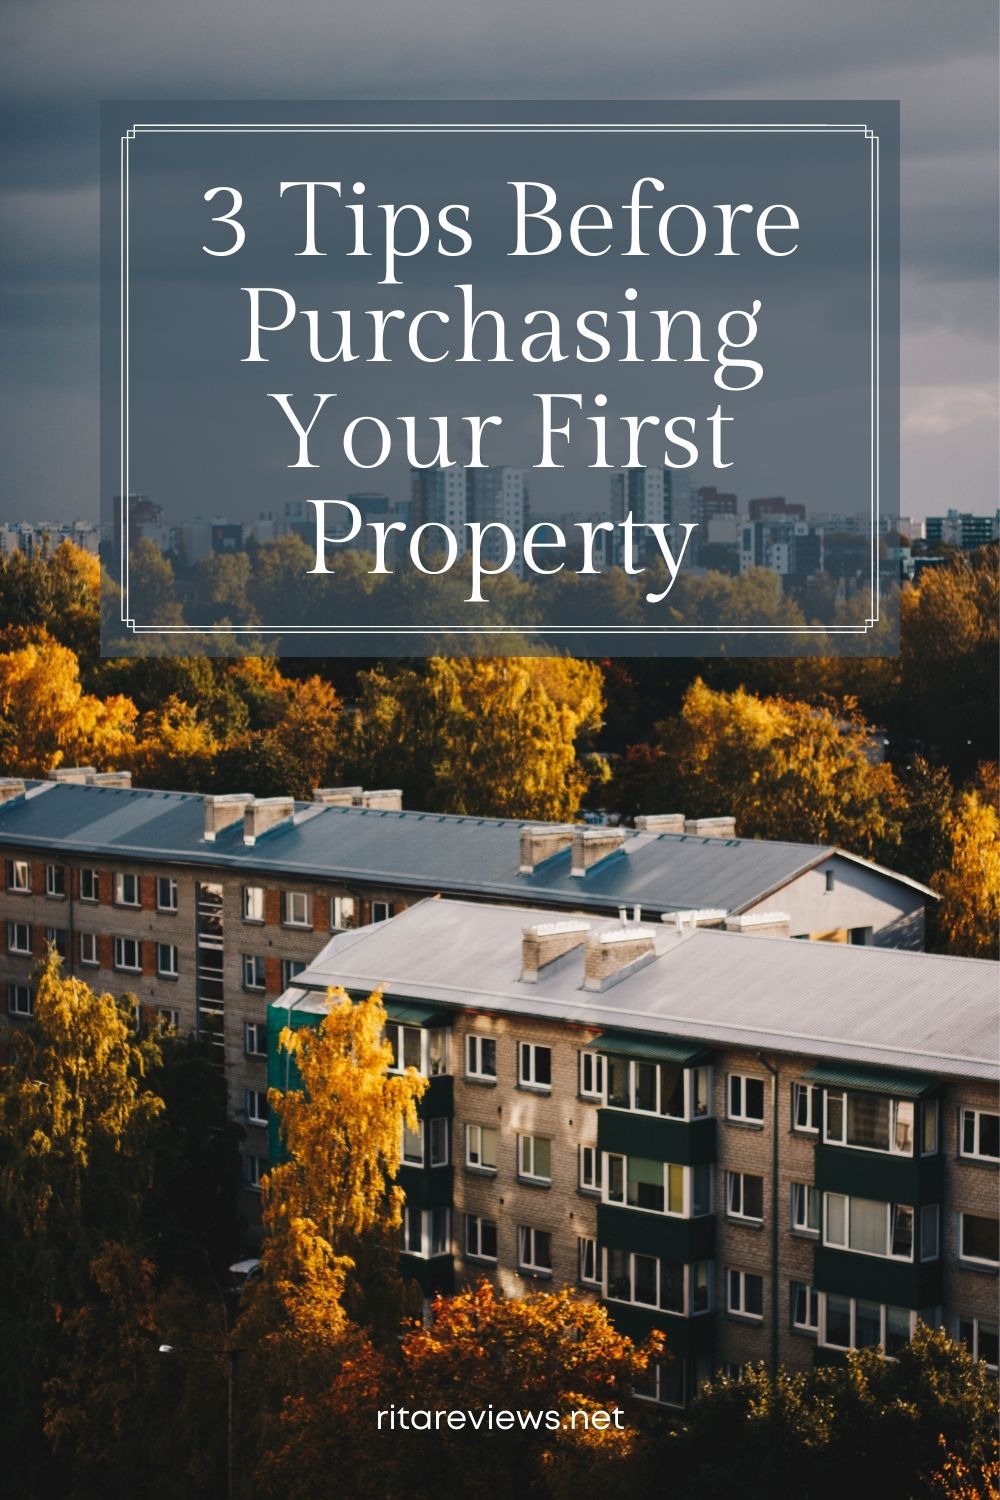 3 Tips Before Purchasing Your First Property